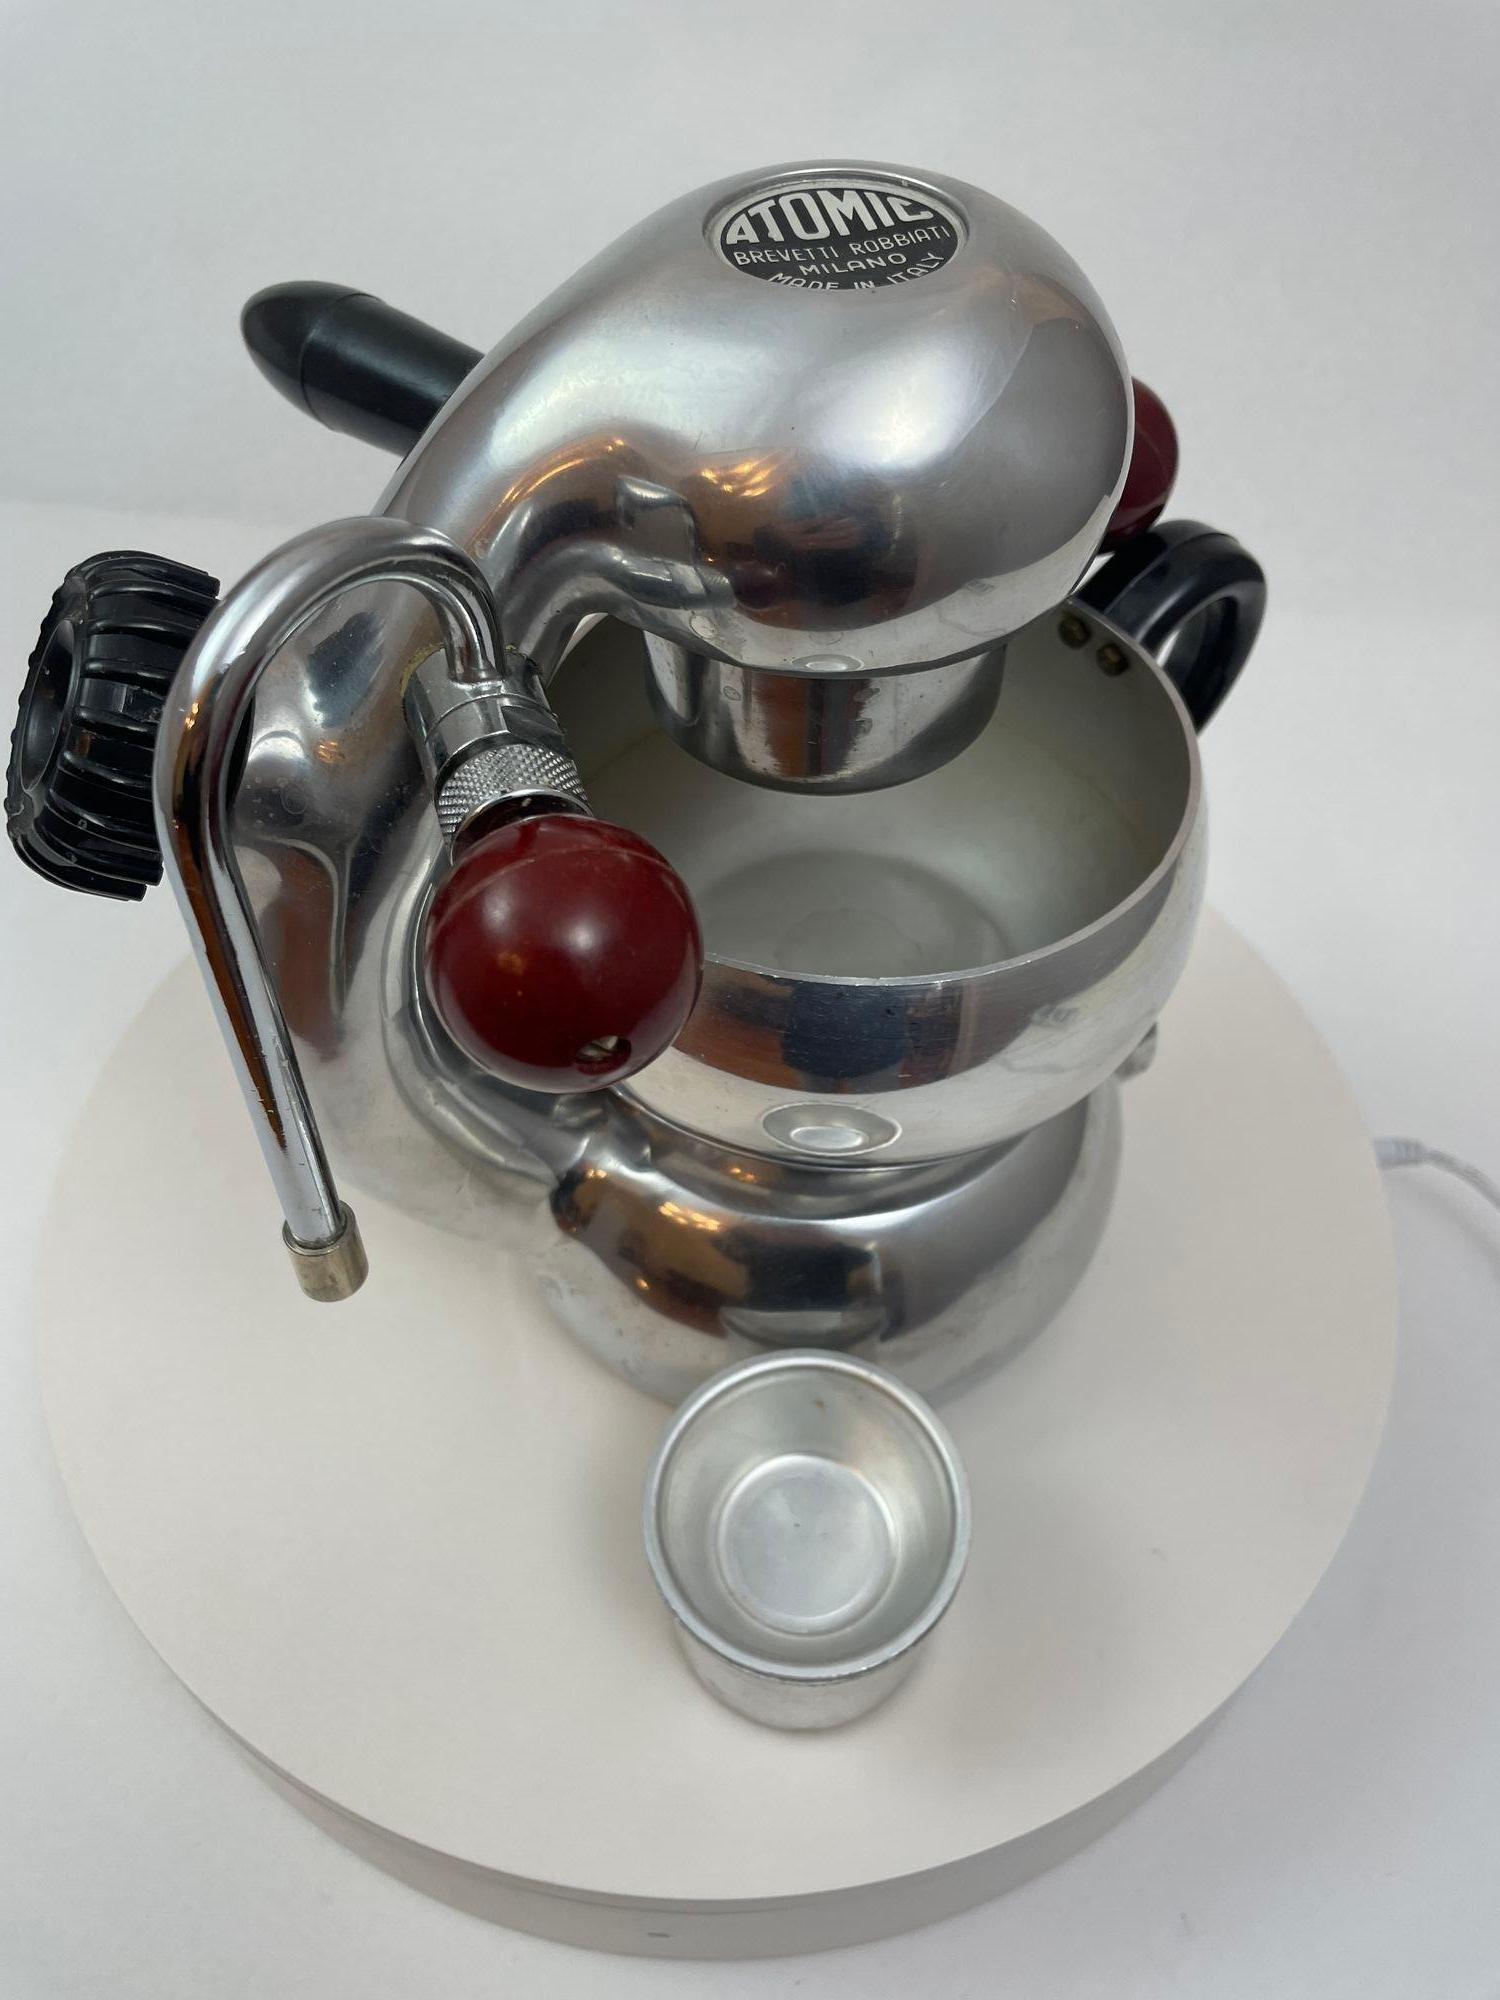 Industrial Vintage Atomic Coffee Maker by Giordano Robbiati Italy 1950s For Sale